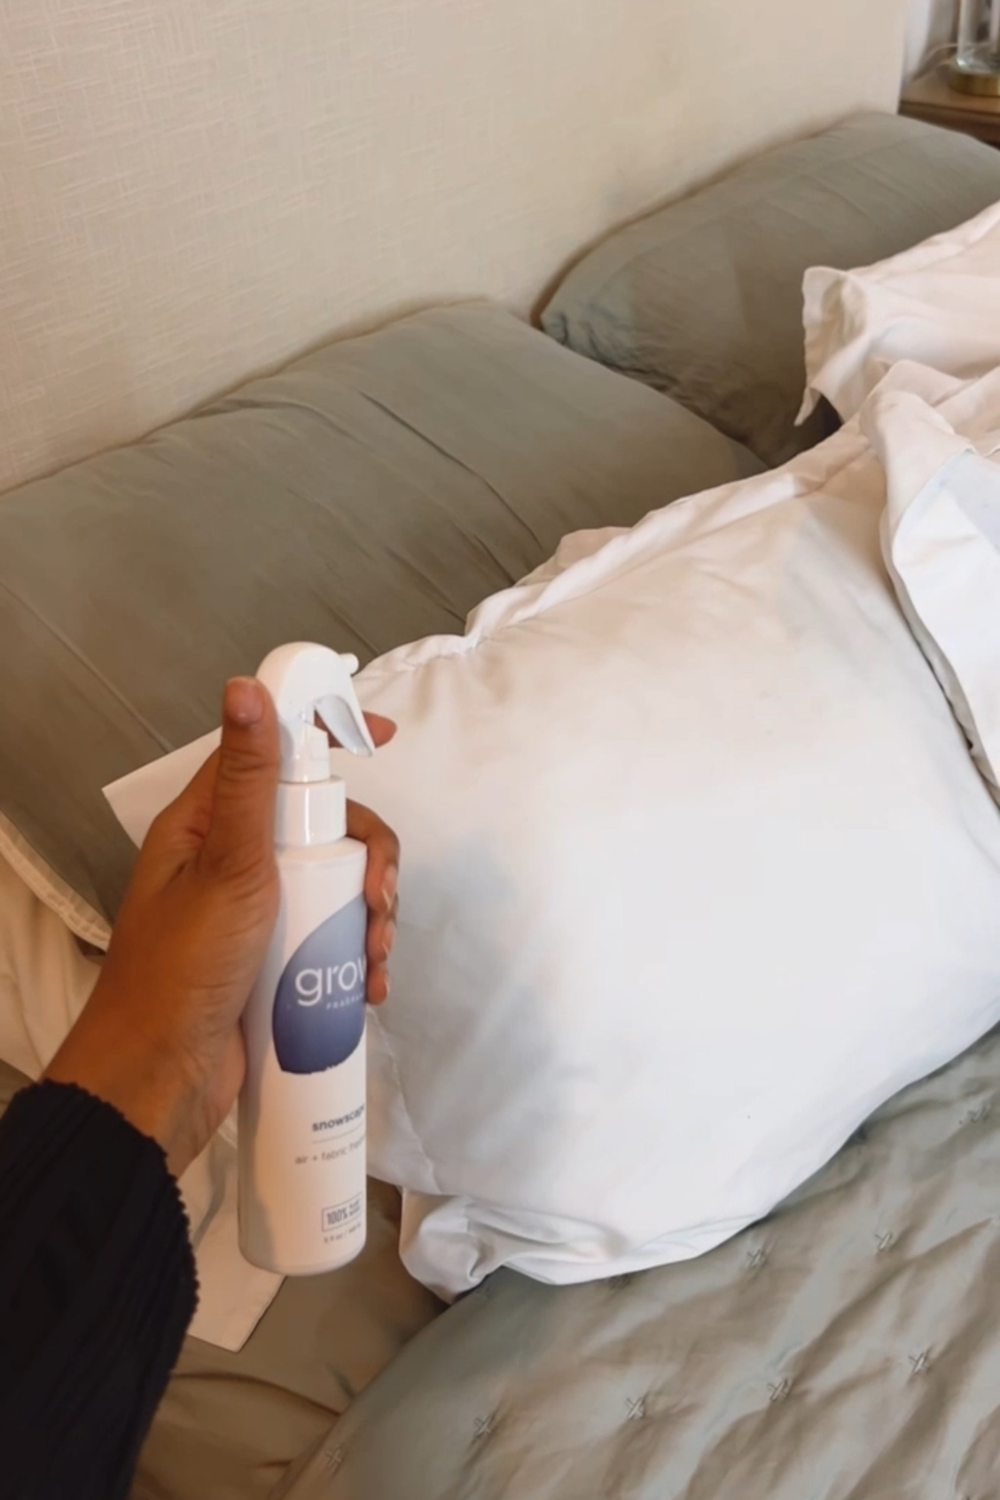 A person's hand is seen holding a white bottle labeled Grow Fragrance Snowscape Scentpoised to spray over a fluffy white pillow. The pillow rests against a backdrop of a neatly made bed with gray sheets and additional plush pillows, creating a cozy and inviting bedroom setting